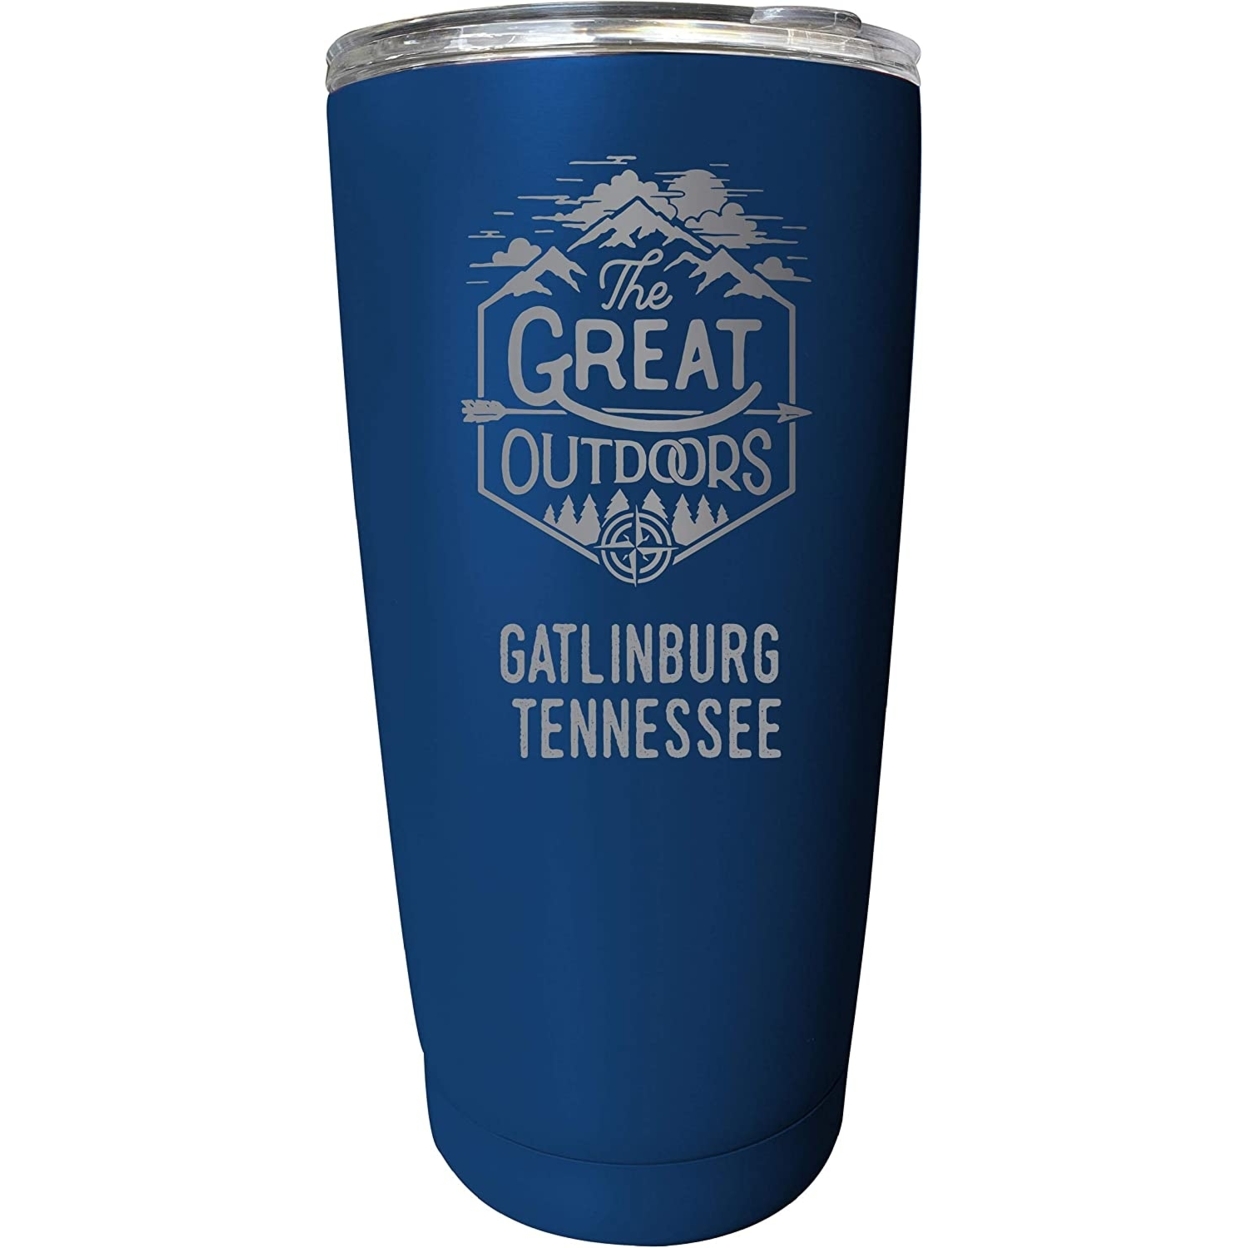 Gatlinburg Tennessee Etched 16 Oz Stainless Steel Insulated Tumbler Outdoor Adventure Design - Navy